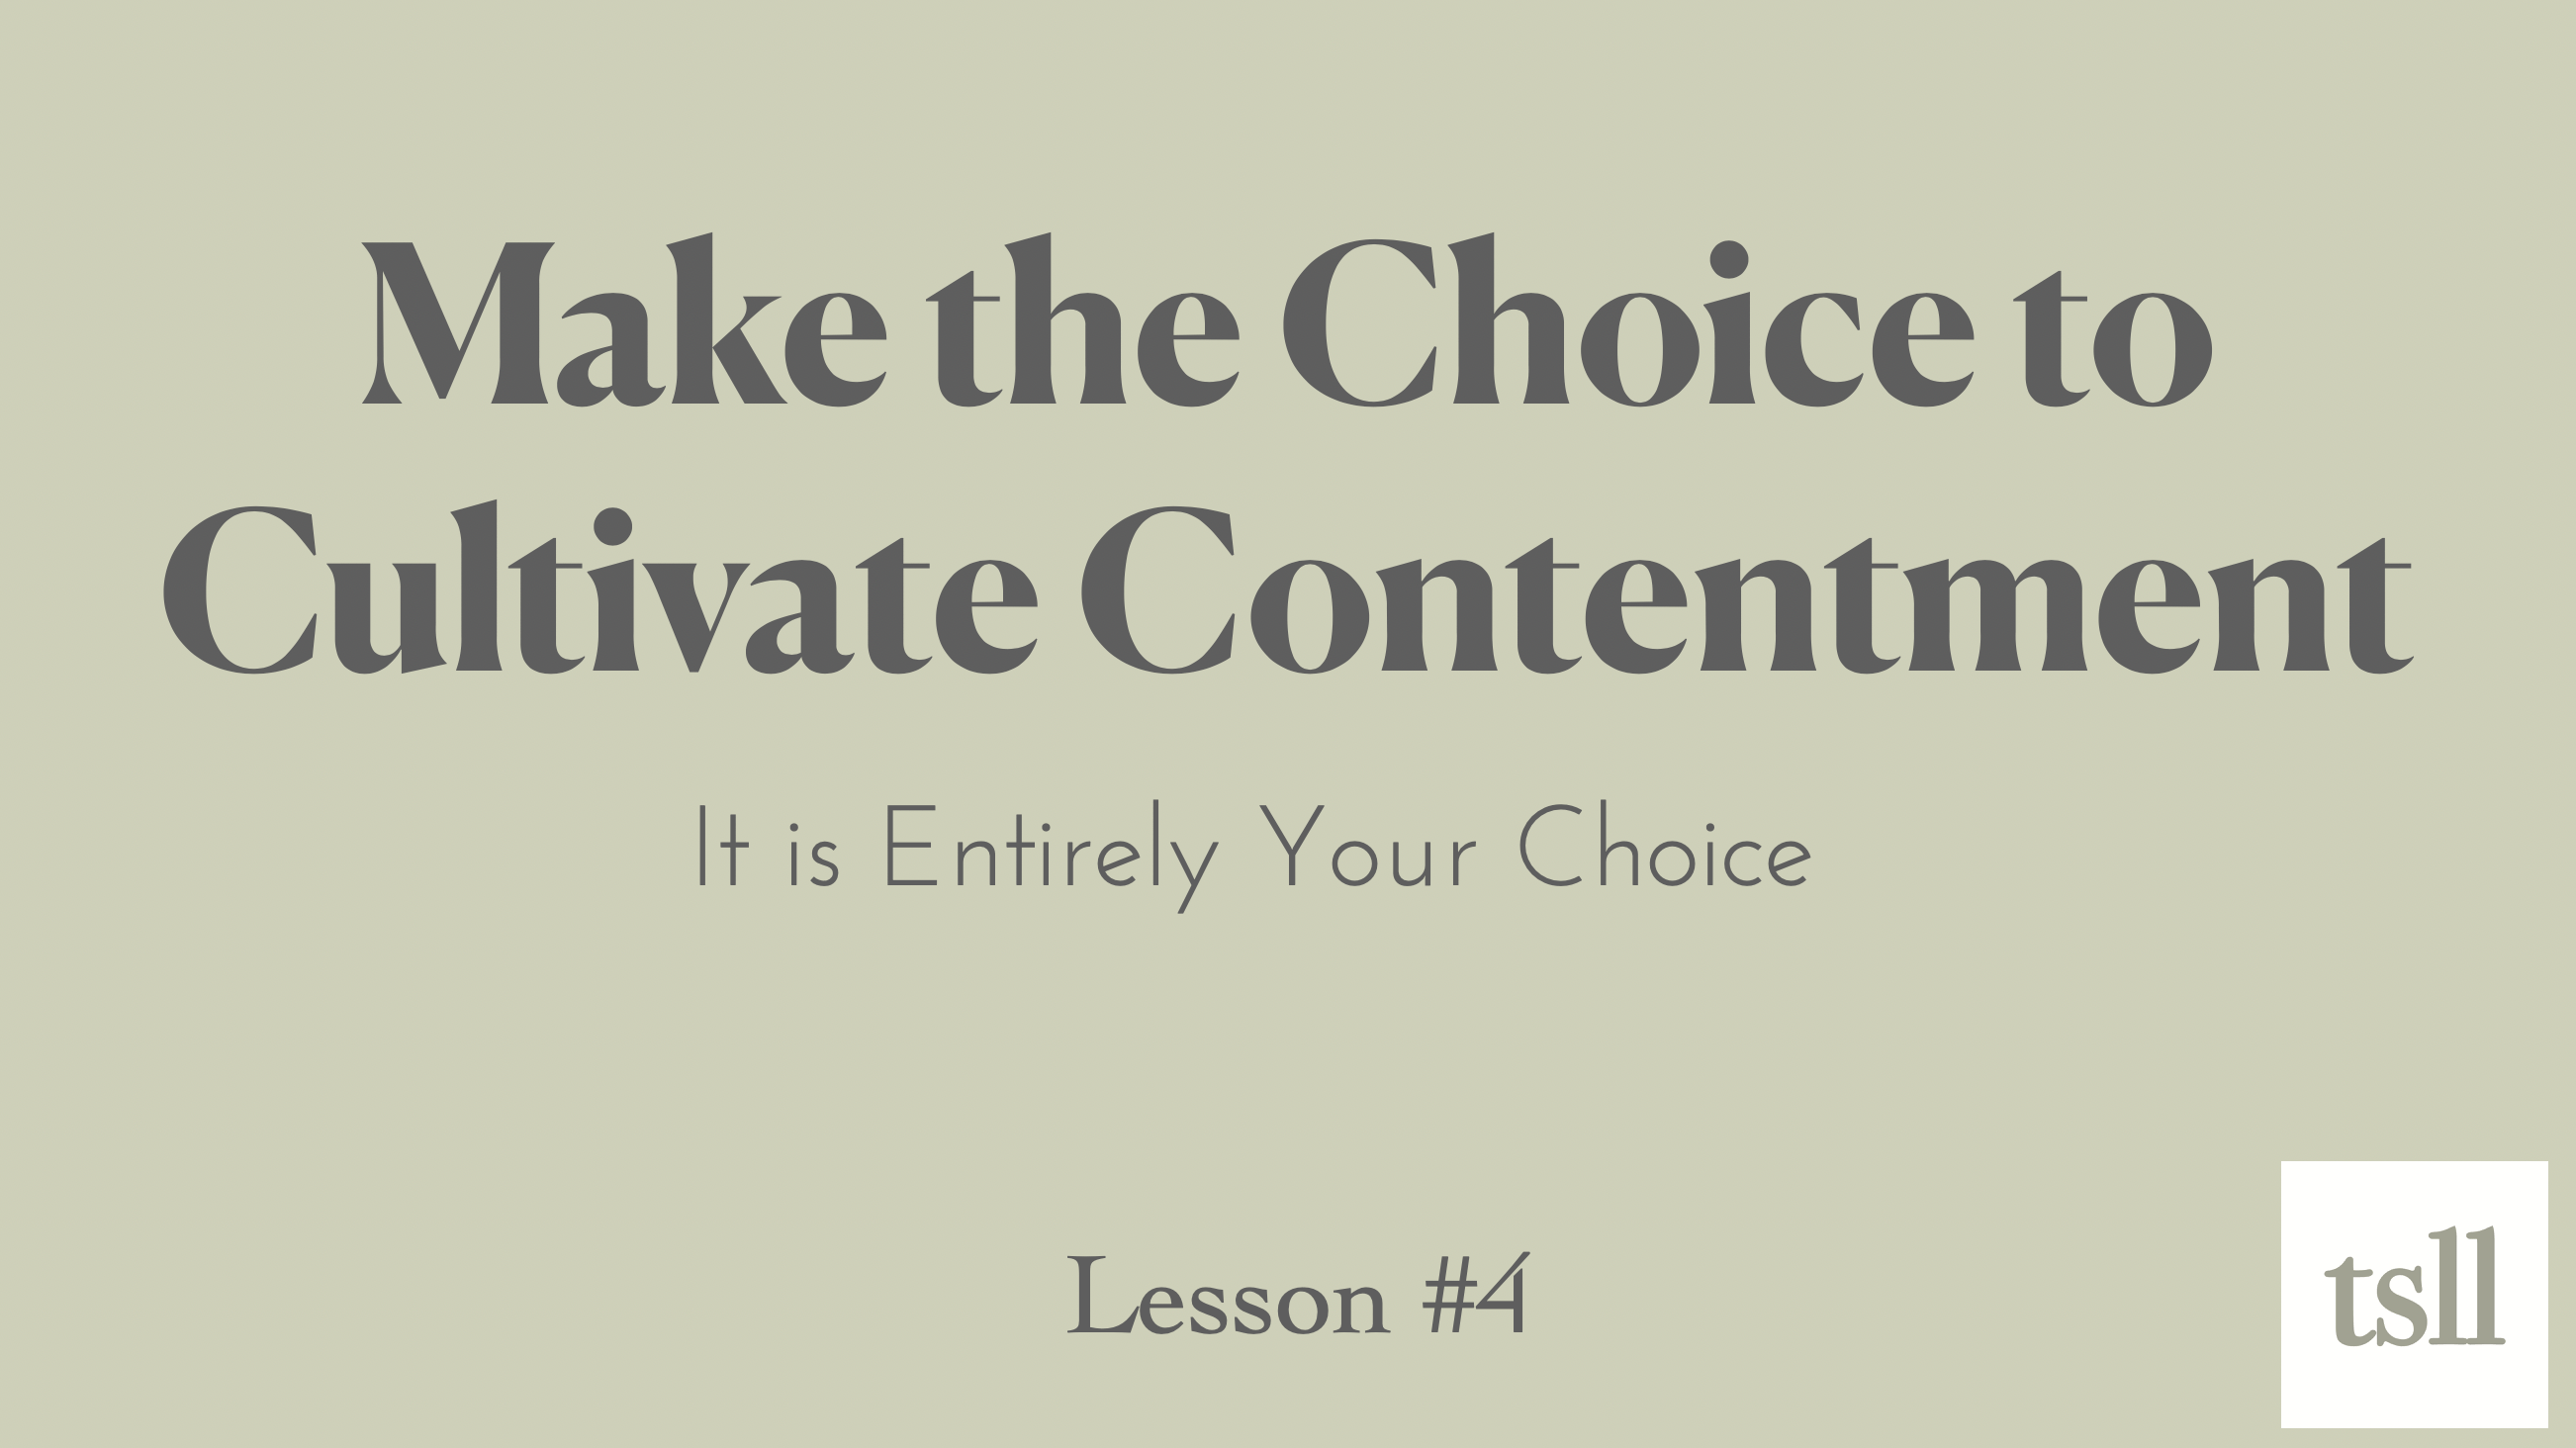 Part 1: Making the Choice to Cultivate Contentment